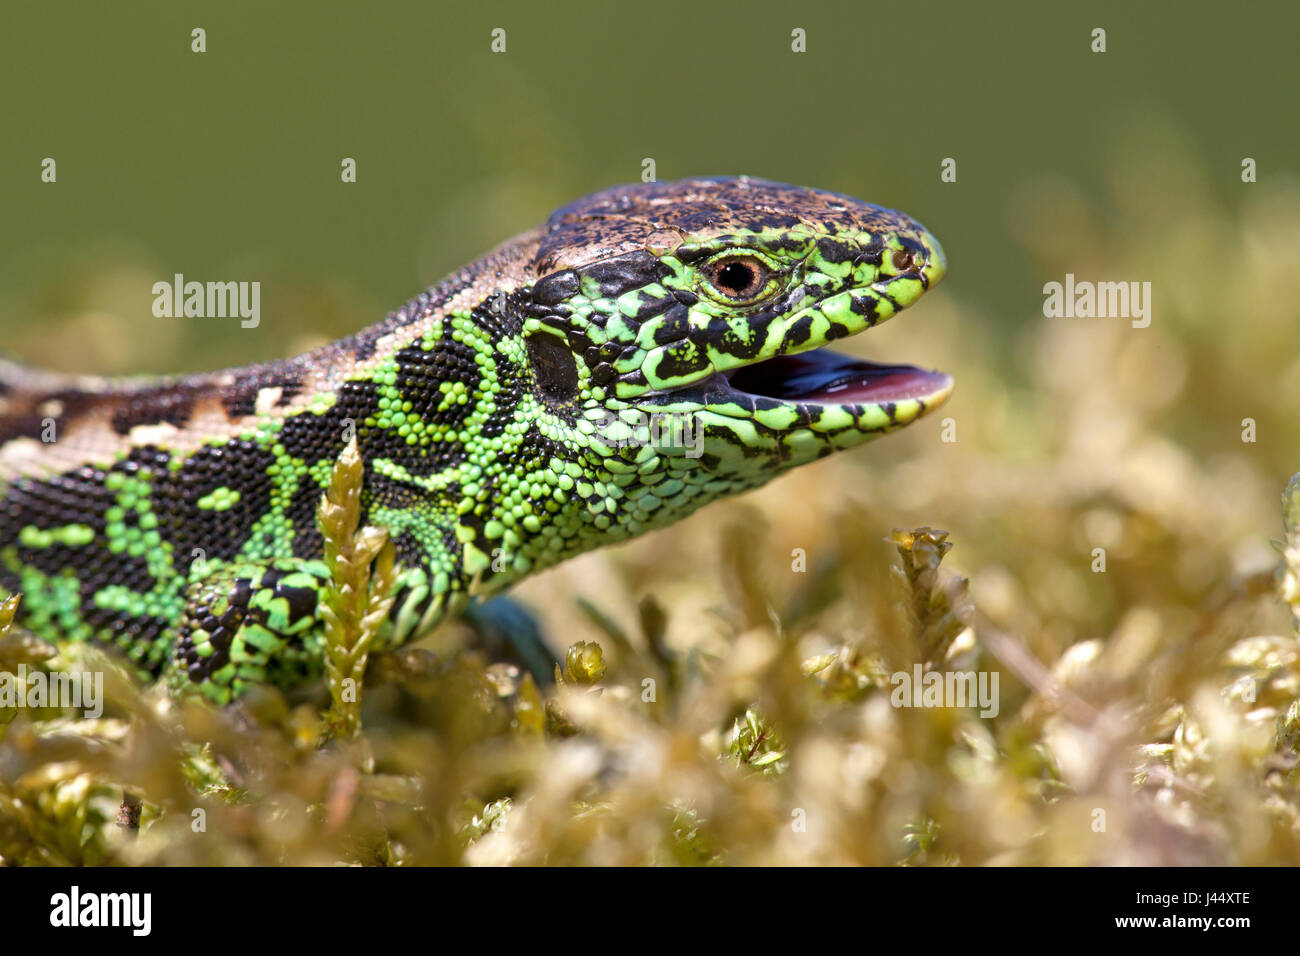 potrait of a green male sand lizard on moss against a green background Stock Photo